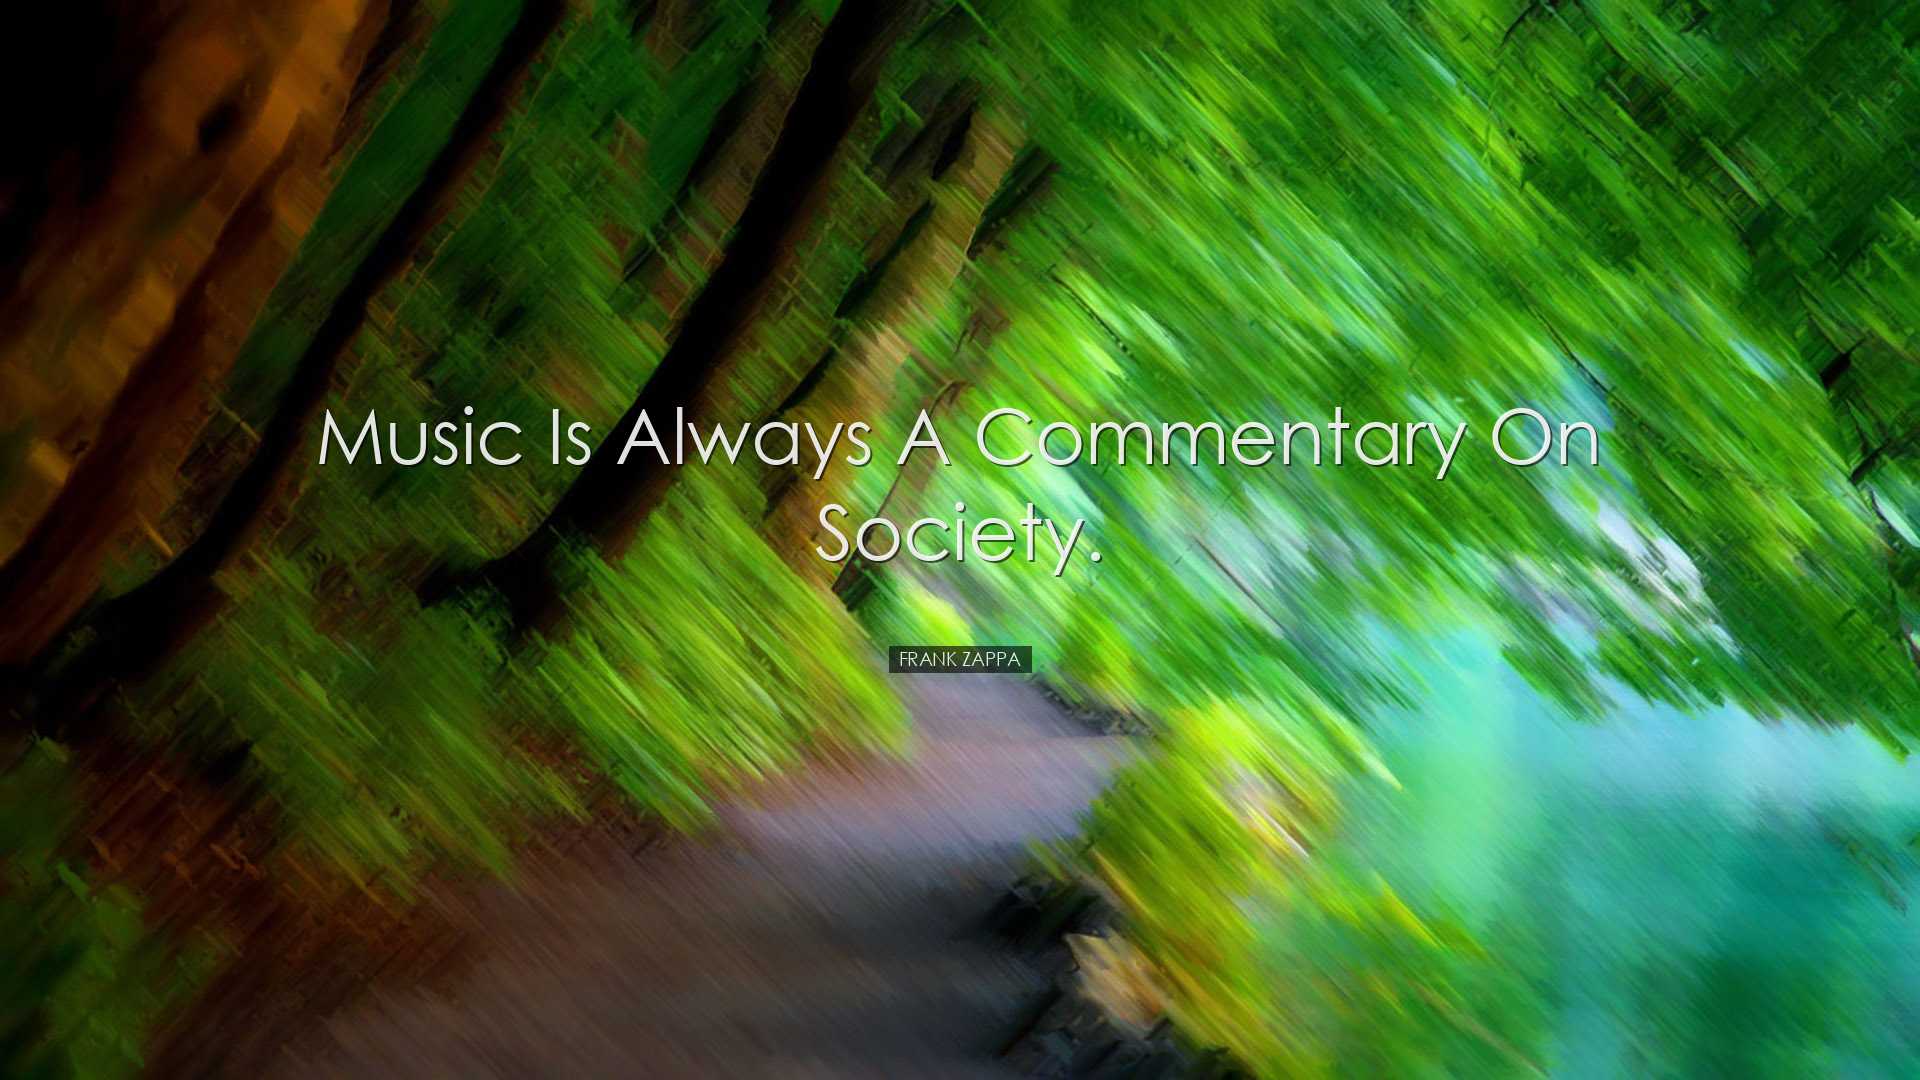 Music is always a commentary on society. - Frank Zappa